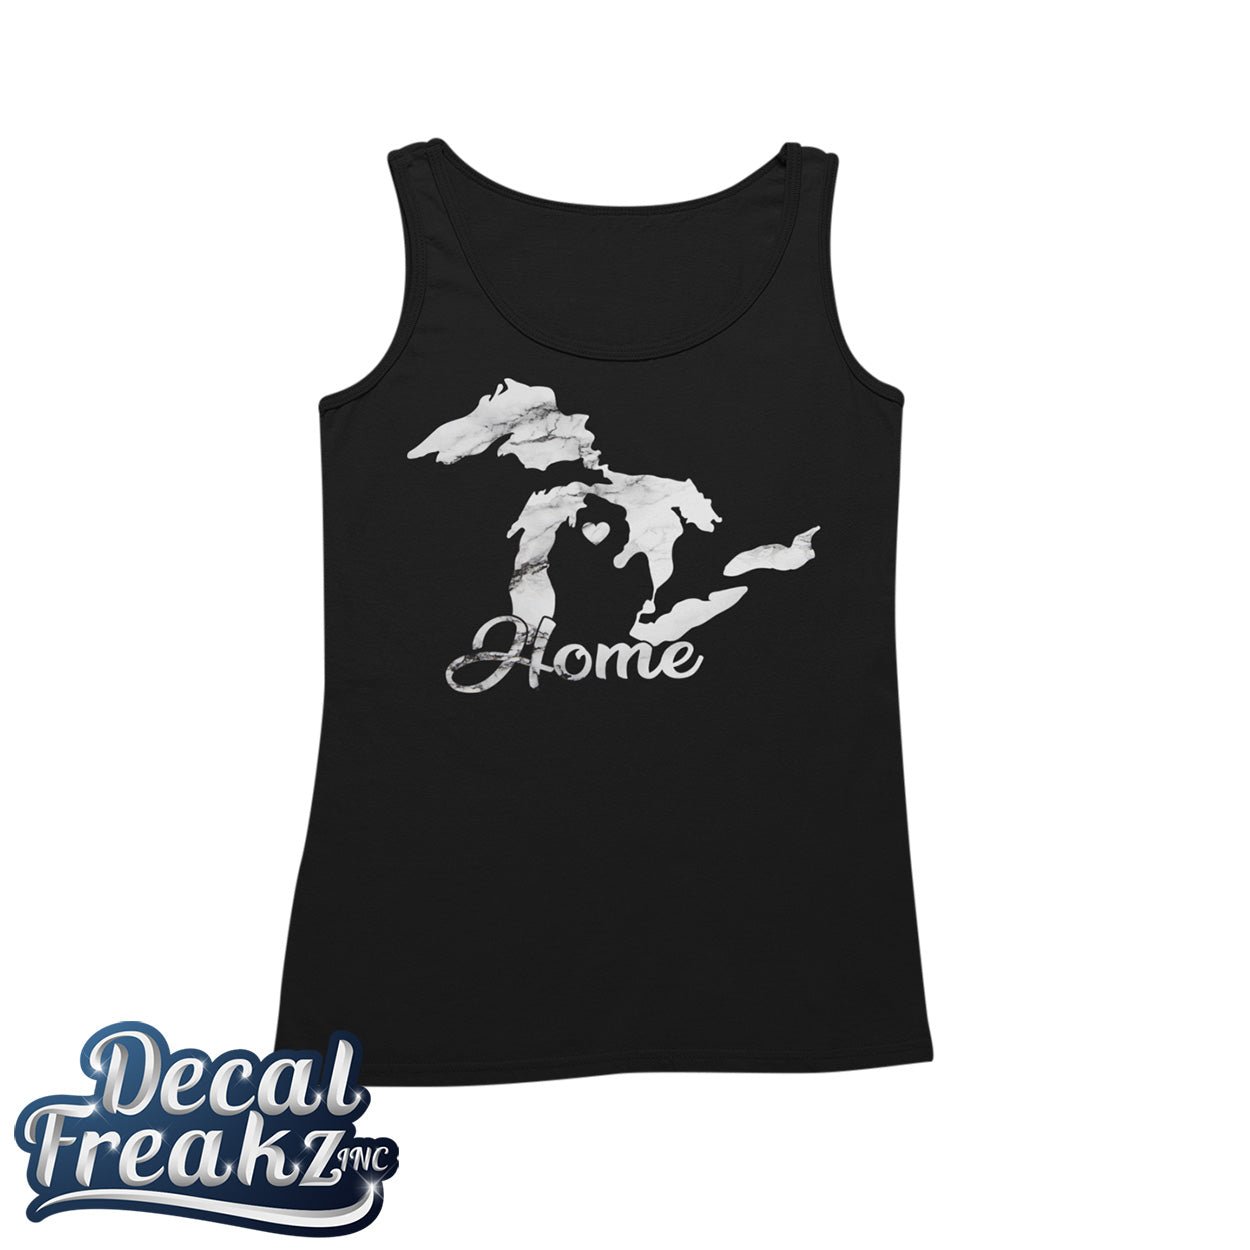 MI Great Lakes Home Marble - Tank, T-Shirt, Hoodie With FREE Decal - DecalFreakz